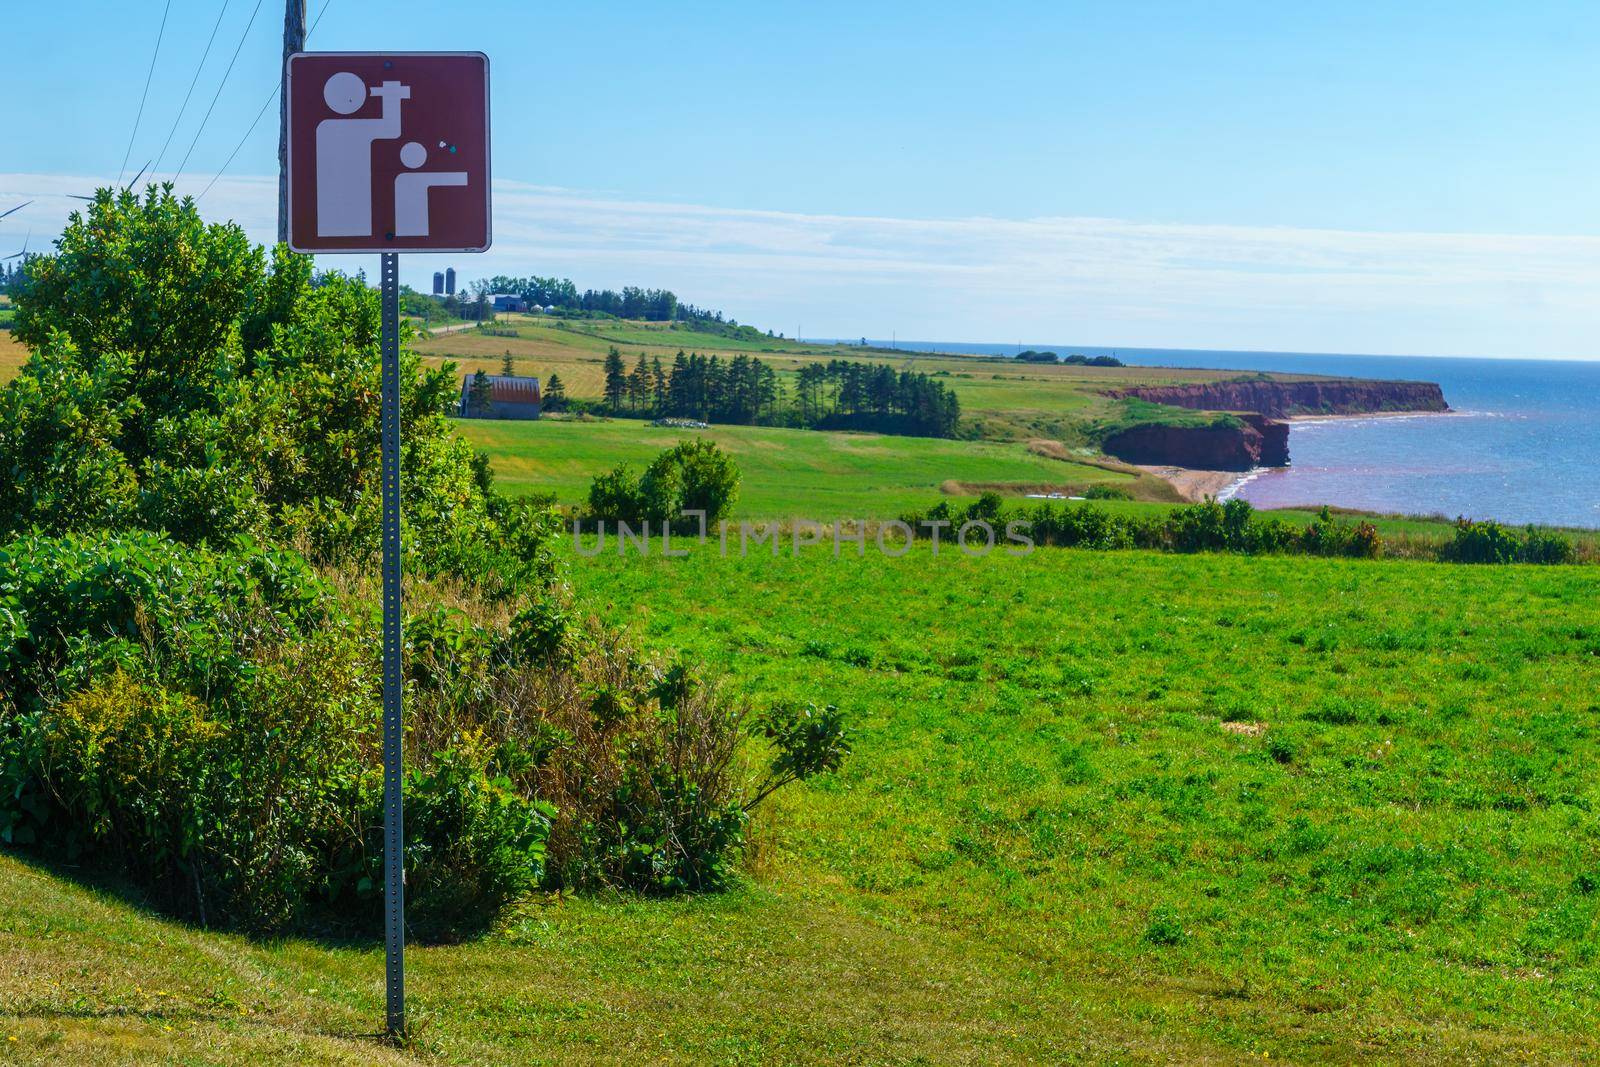 Landscape and countryside in the west cape, PEI by RnDmS